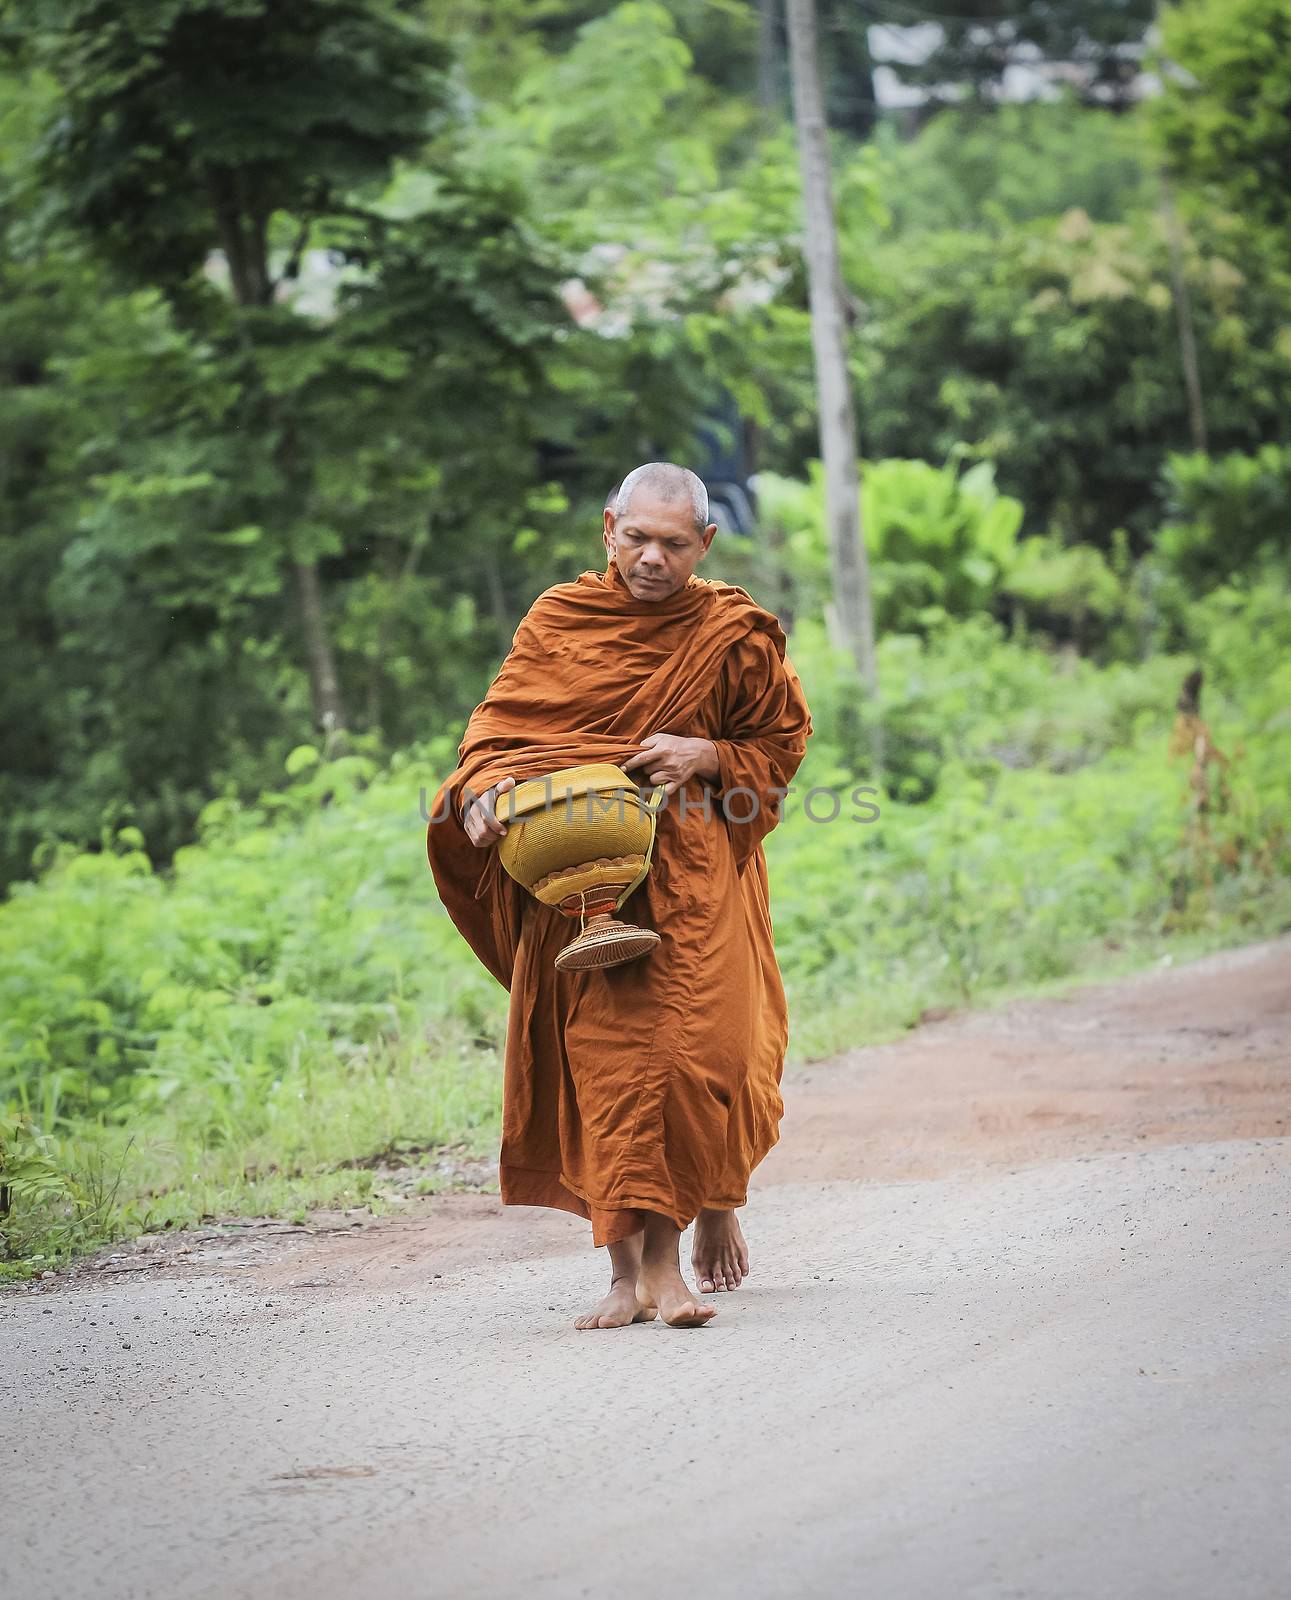 Every day very early in the morning, the monks walk the streets to beg give food offerings to a Buddhist monk 